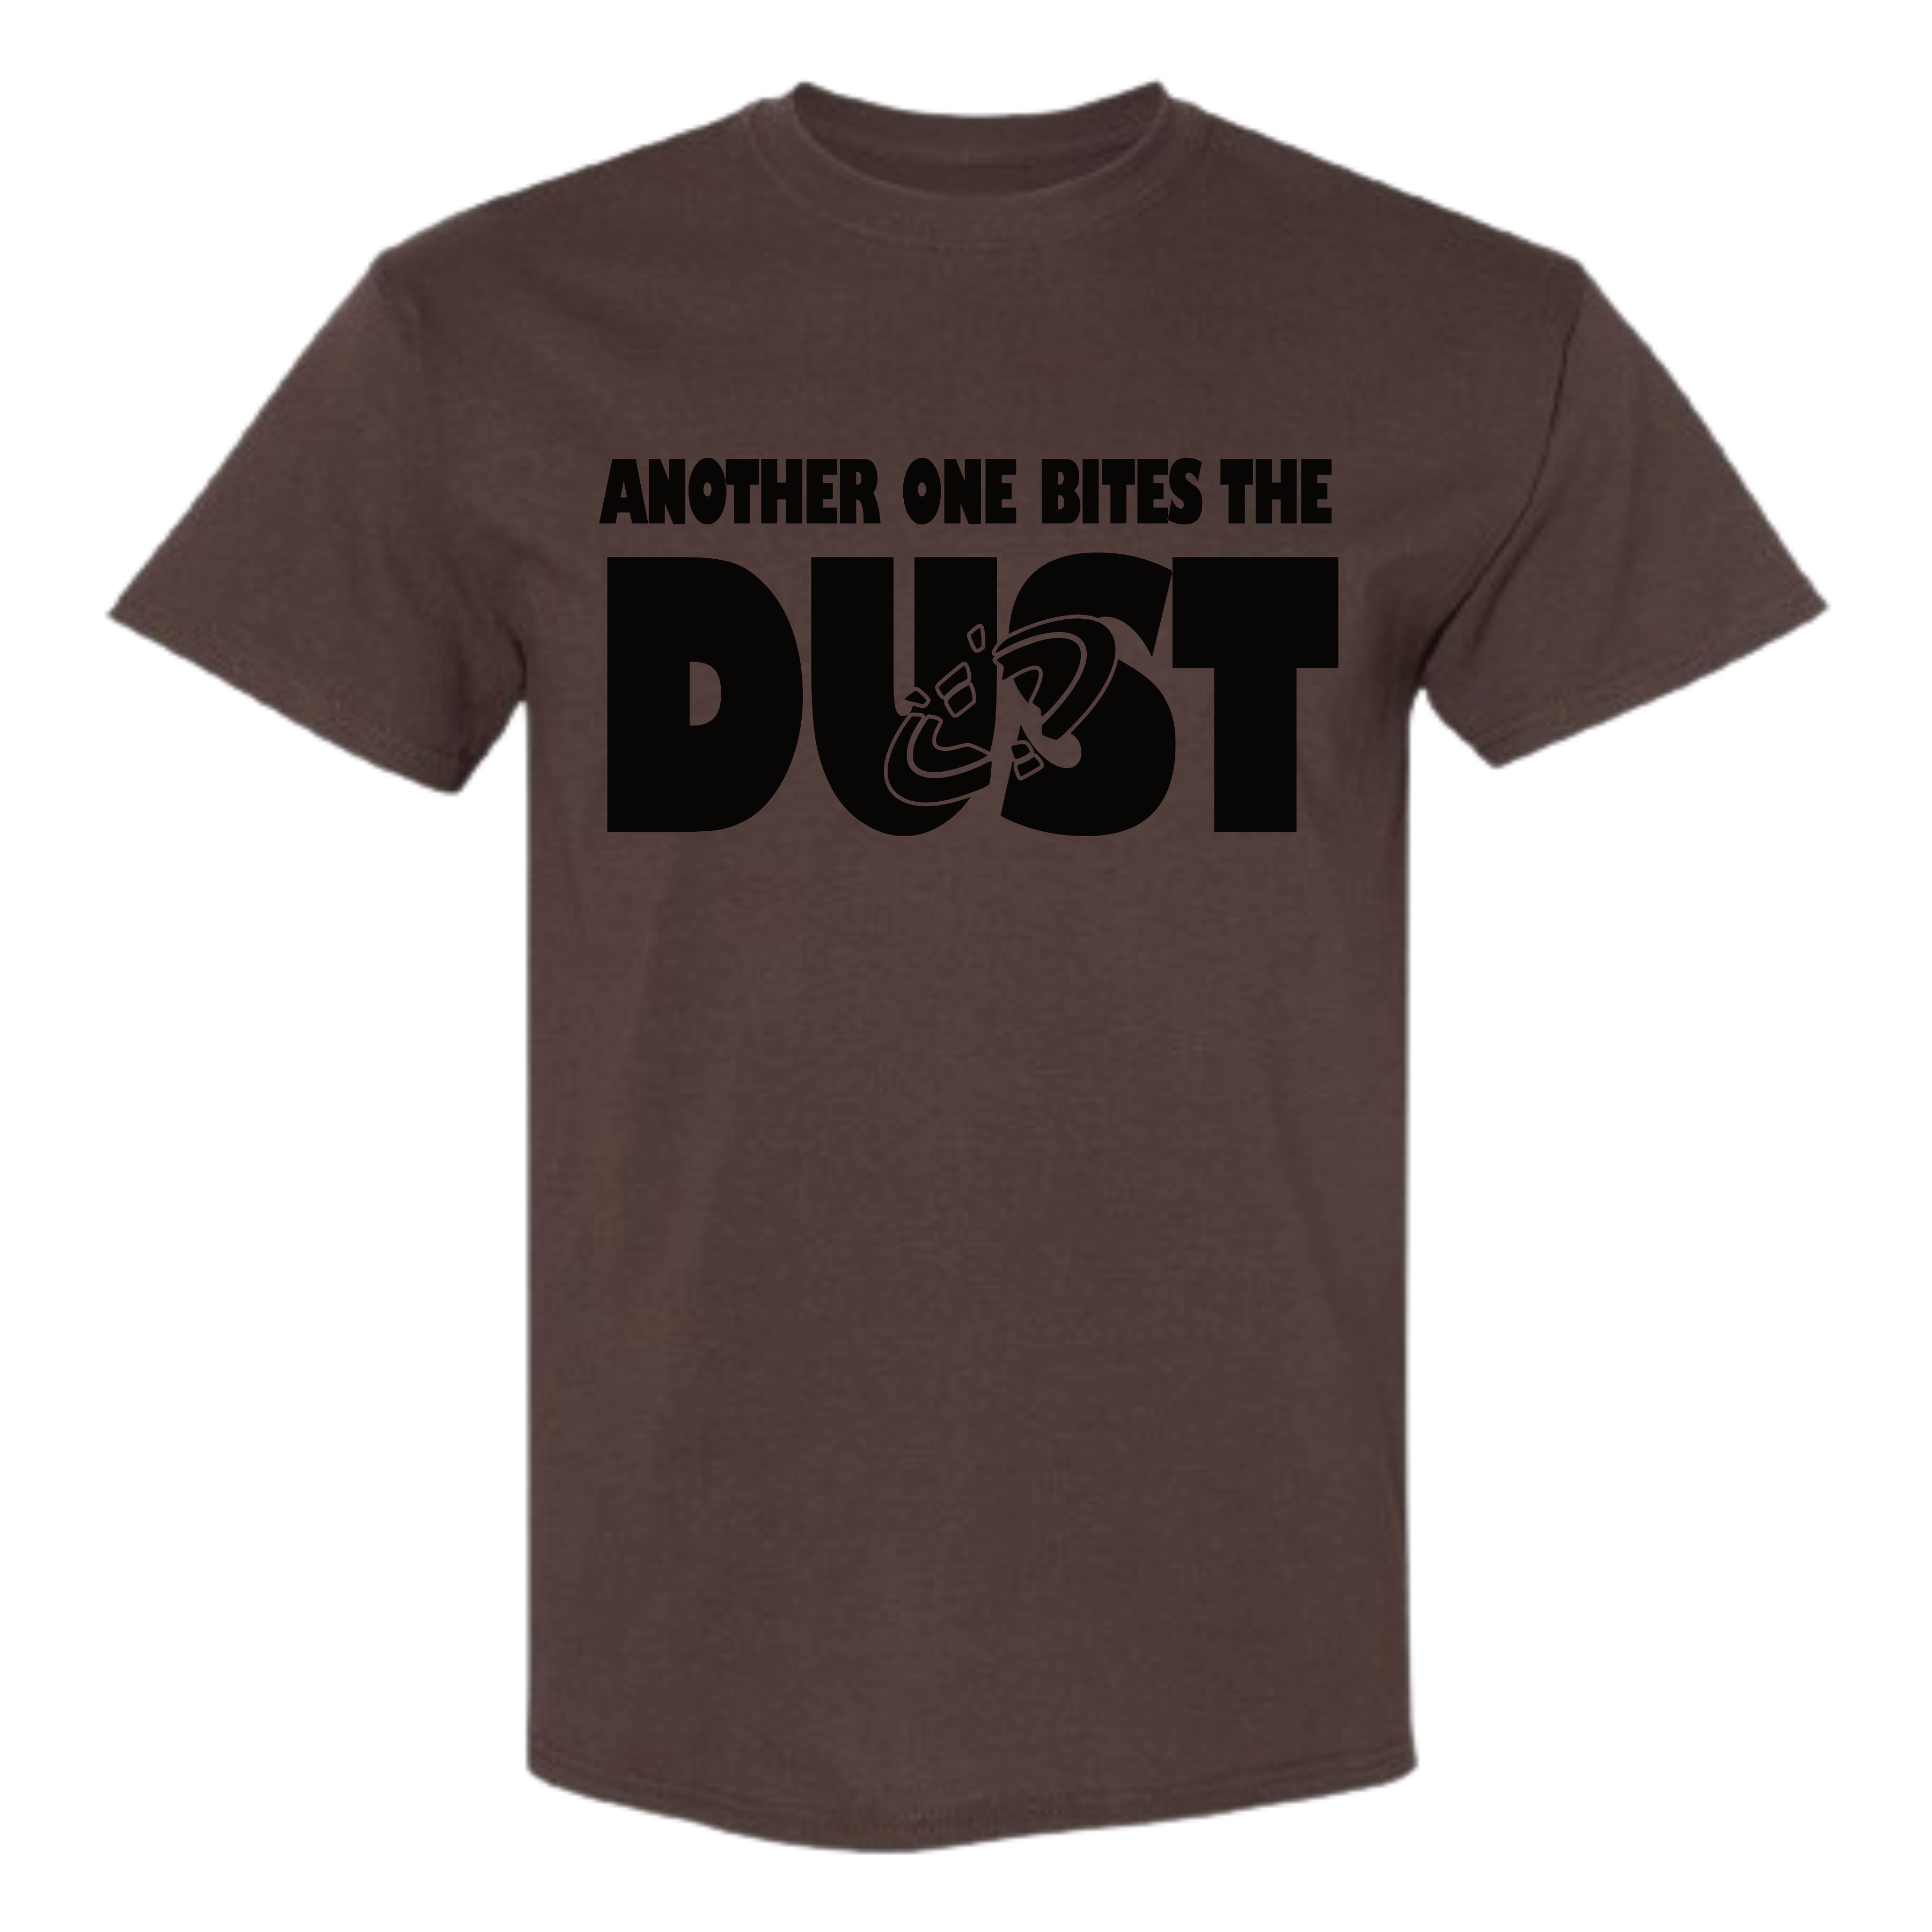 Another one bites the Dust T-shirt